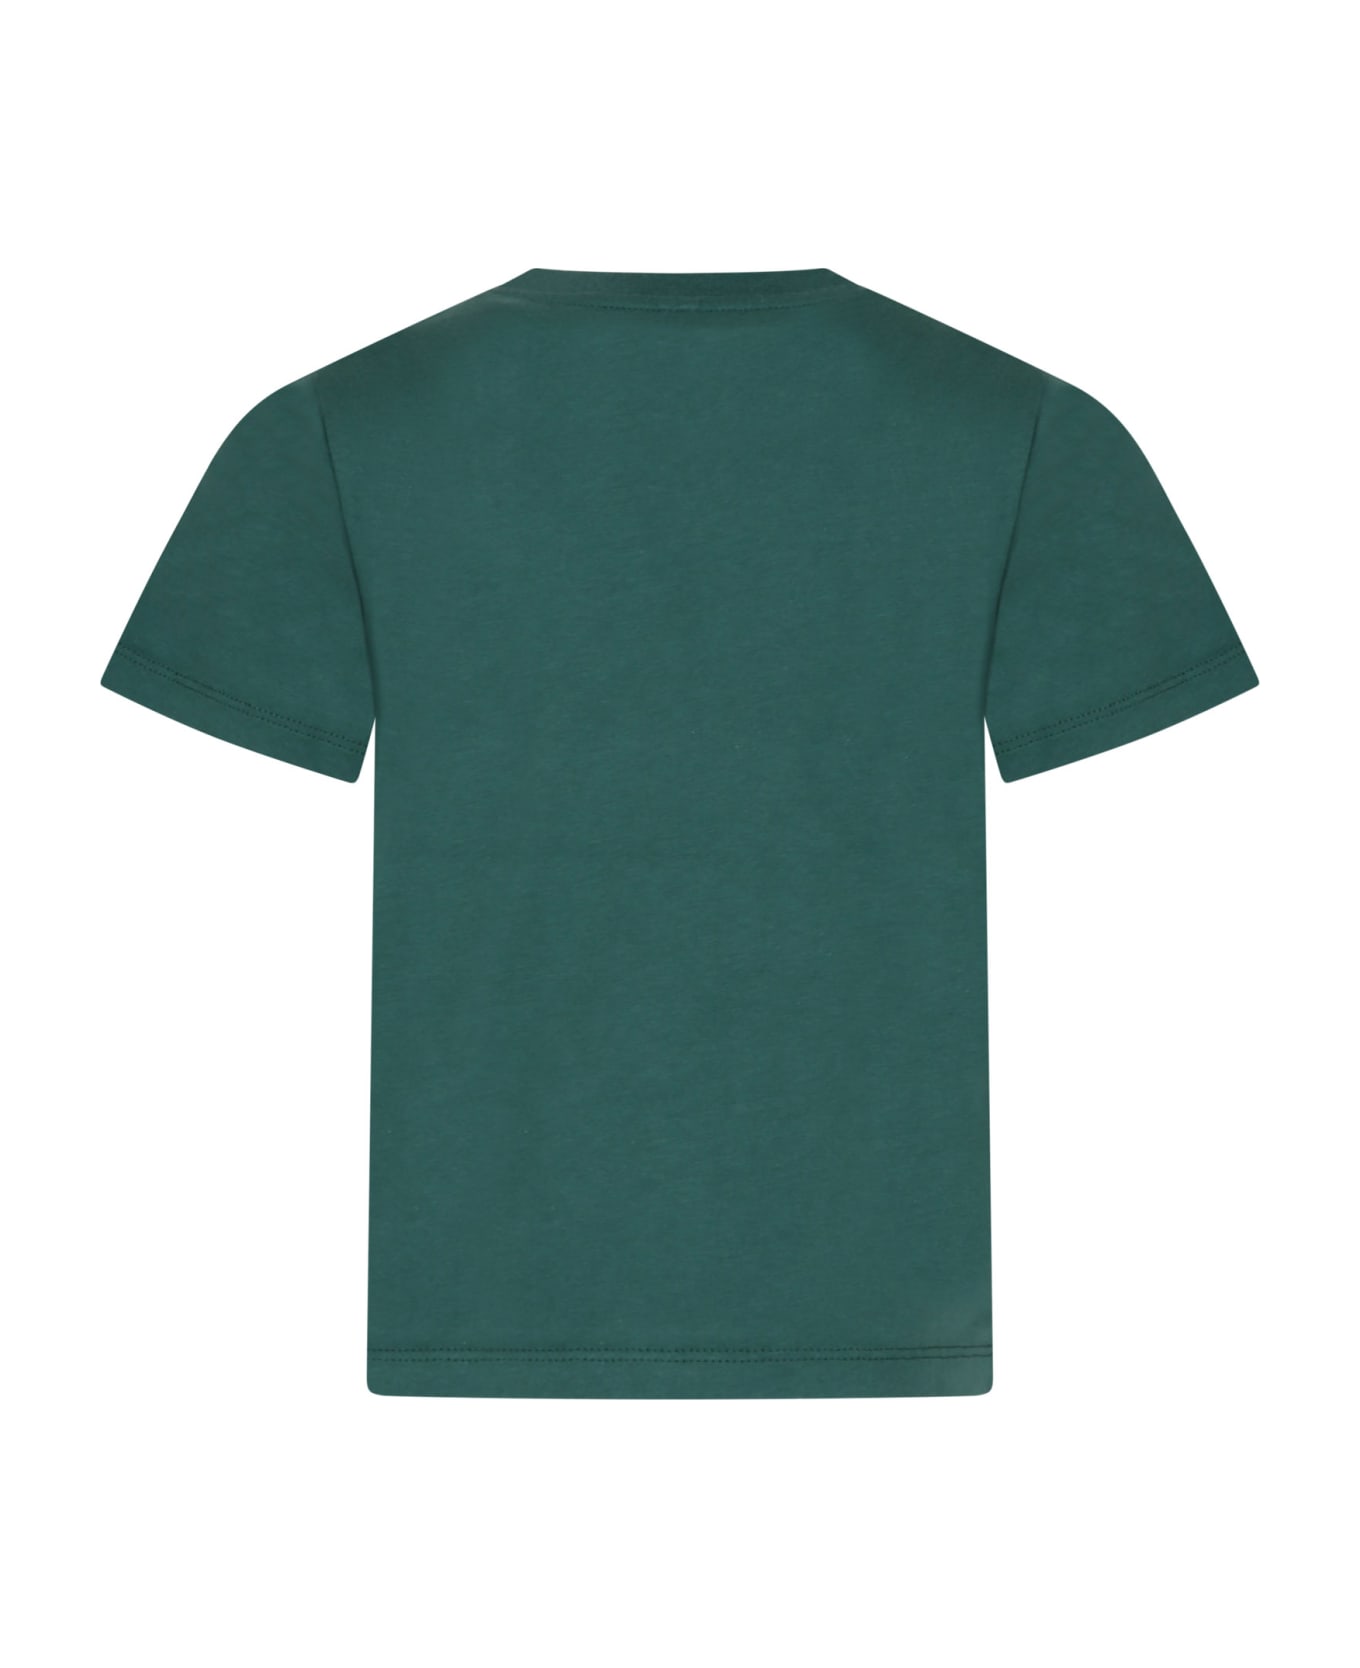 Stella McCartney Kids Green T-shirt For Boy With Bear Print And Writing - Green